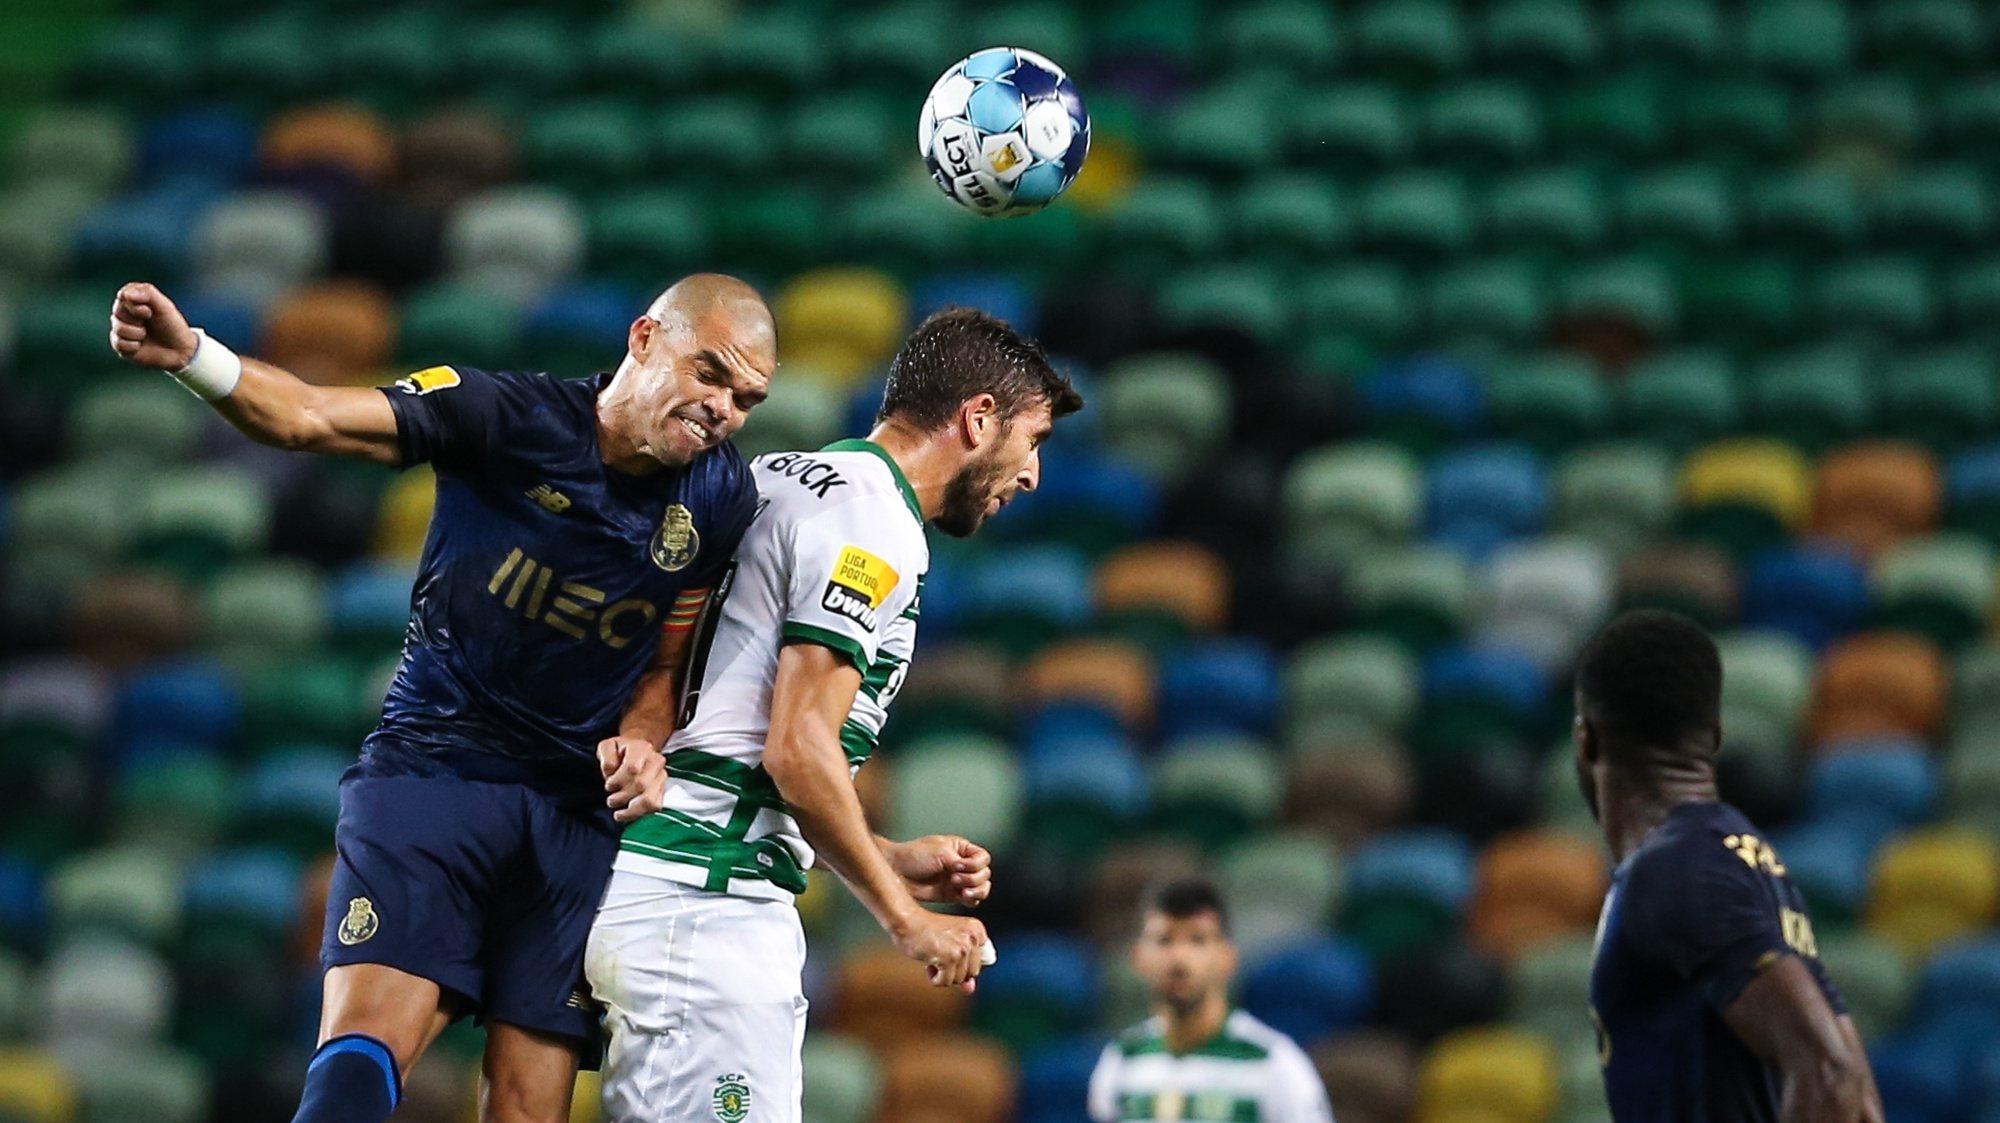 Sporting&#039;s Paulinho (R) in action against FC Porto&#039;s Pepe (L) during the Portuguese First League soccer match between Sporting and FC Porto at José de Alvalade Stadium in Lisbon, Portugal, 11 September 2021. RODRIGO ANTUNES/LUSA